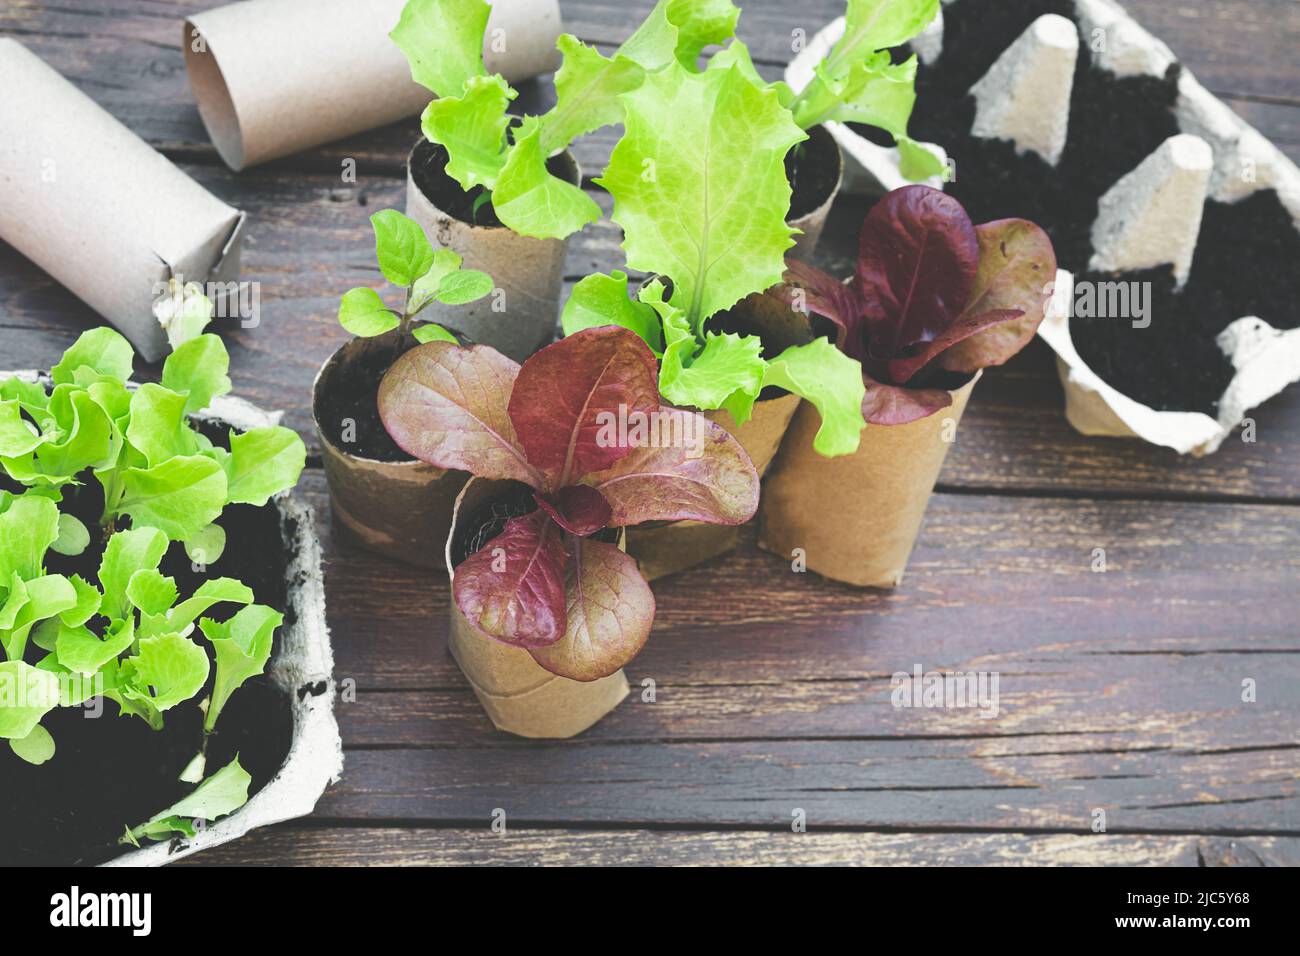 Seedlings in biodegradable pots made of inner tubes from toilet paper rolls and reused egg boxes on the wooden table, top view Stock Photo